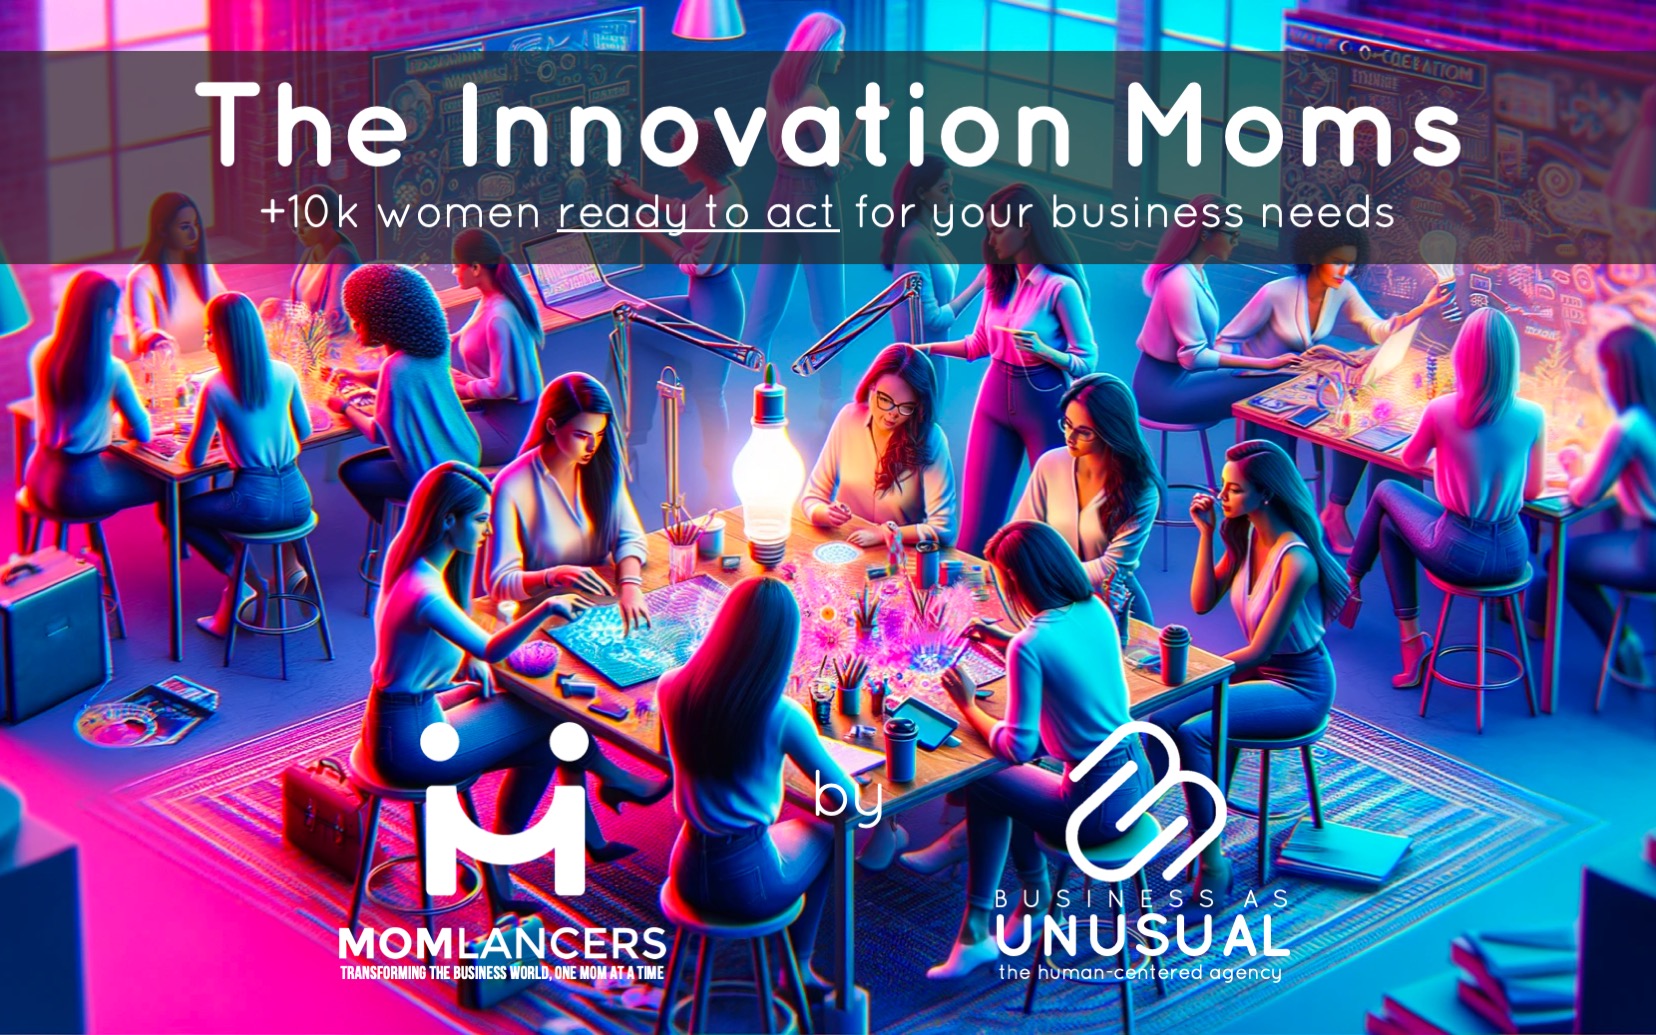 The Innovation Moms by Momlancers and Business as Unusual